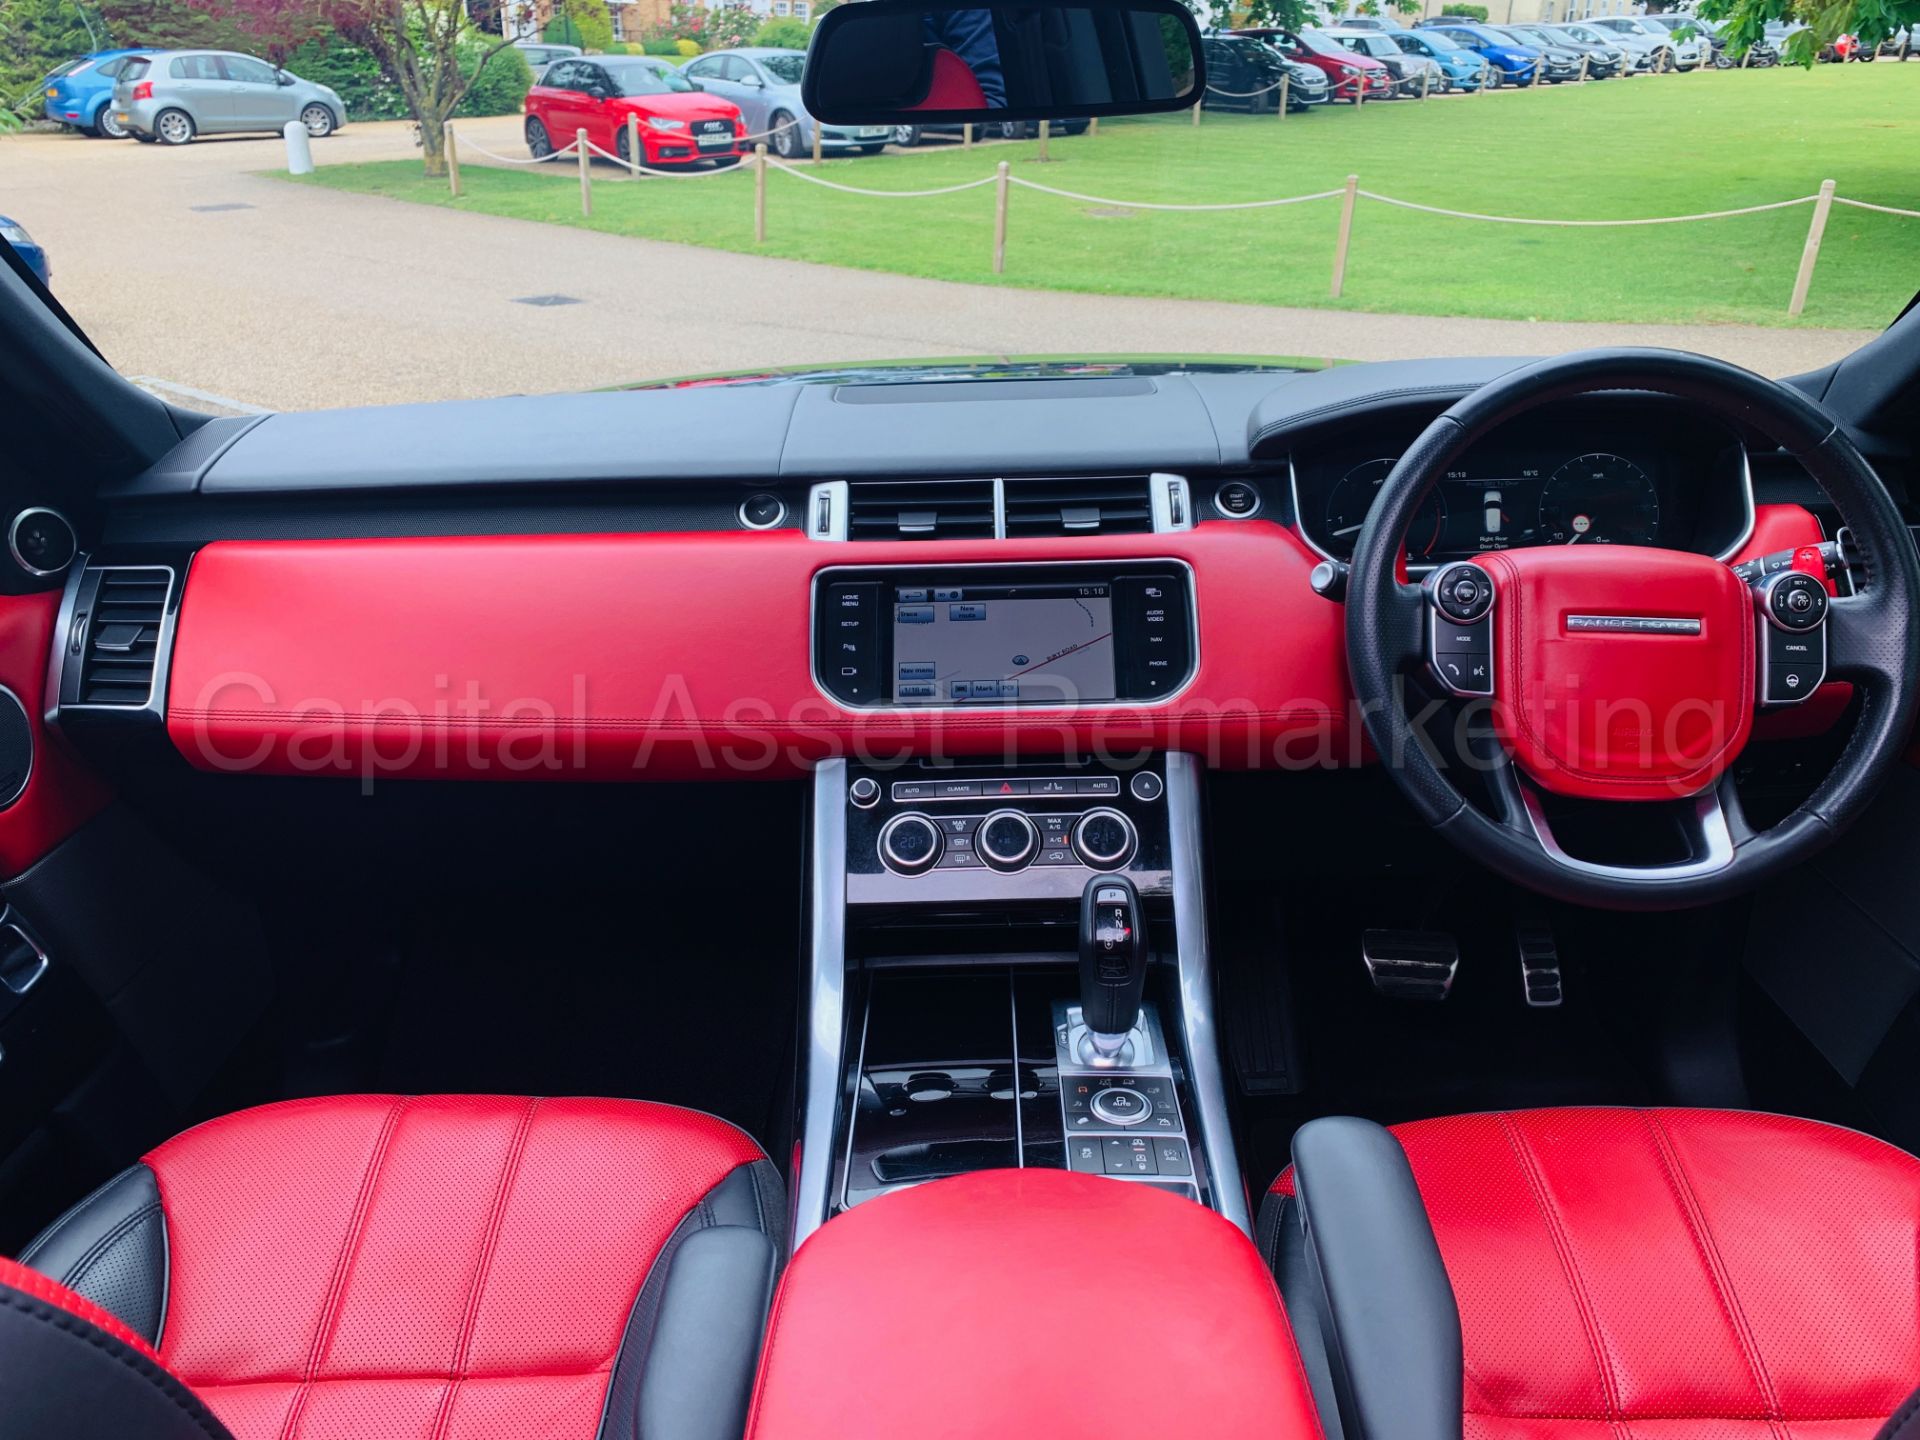 (On Sale) RANGE ROVER SPORT *AUTOBIOGRAPHY DYNAMIC* (2015) '4.4 SDV8 8 SPEED AUTO' **ULTIMATE SPEC** - Image 47 of 83